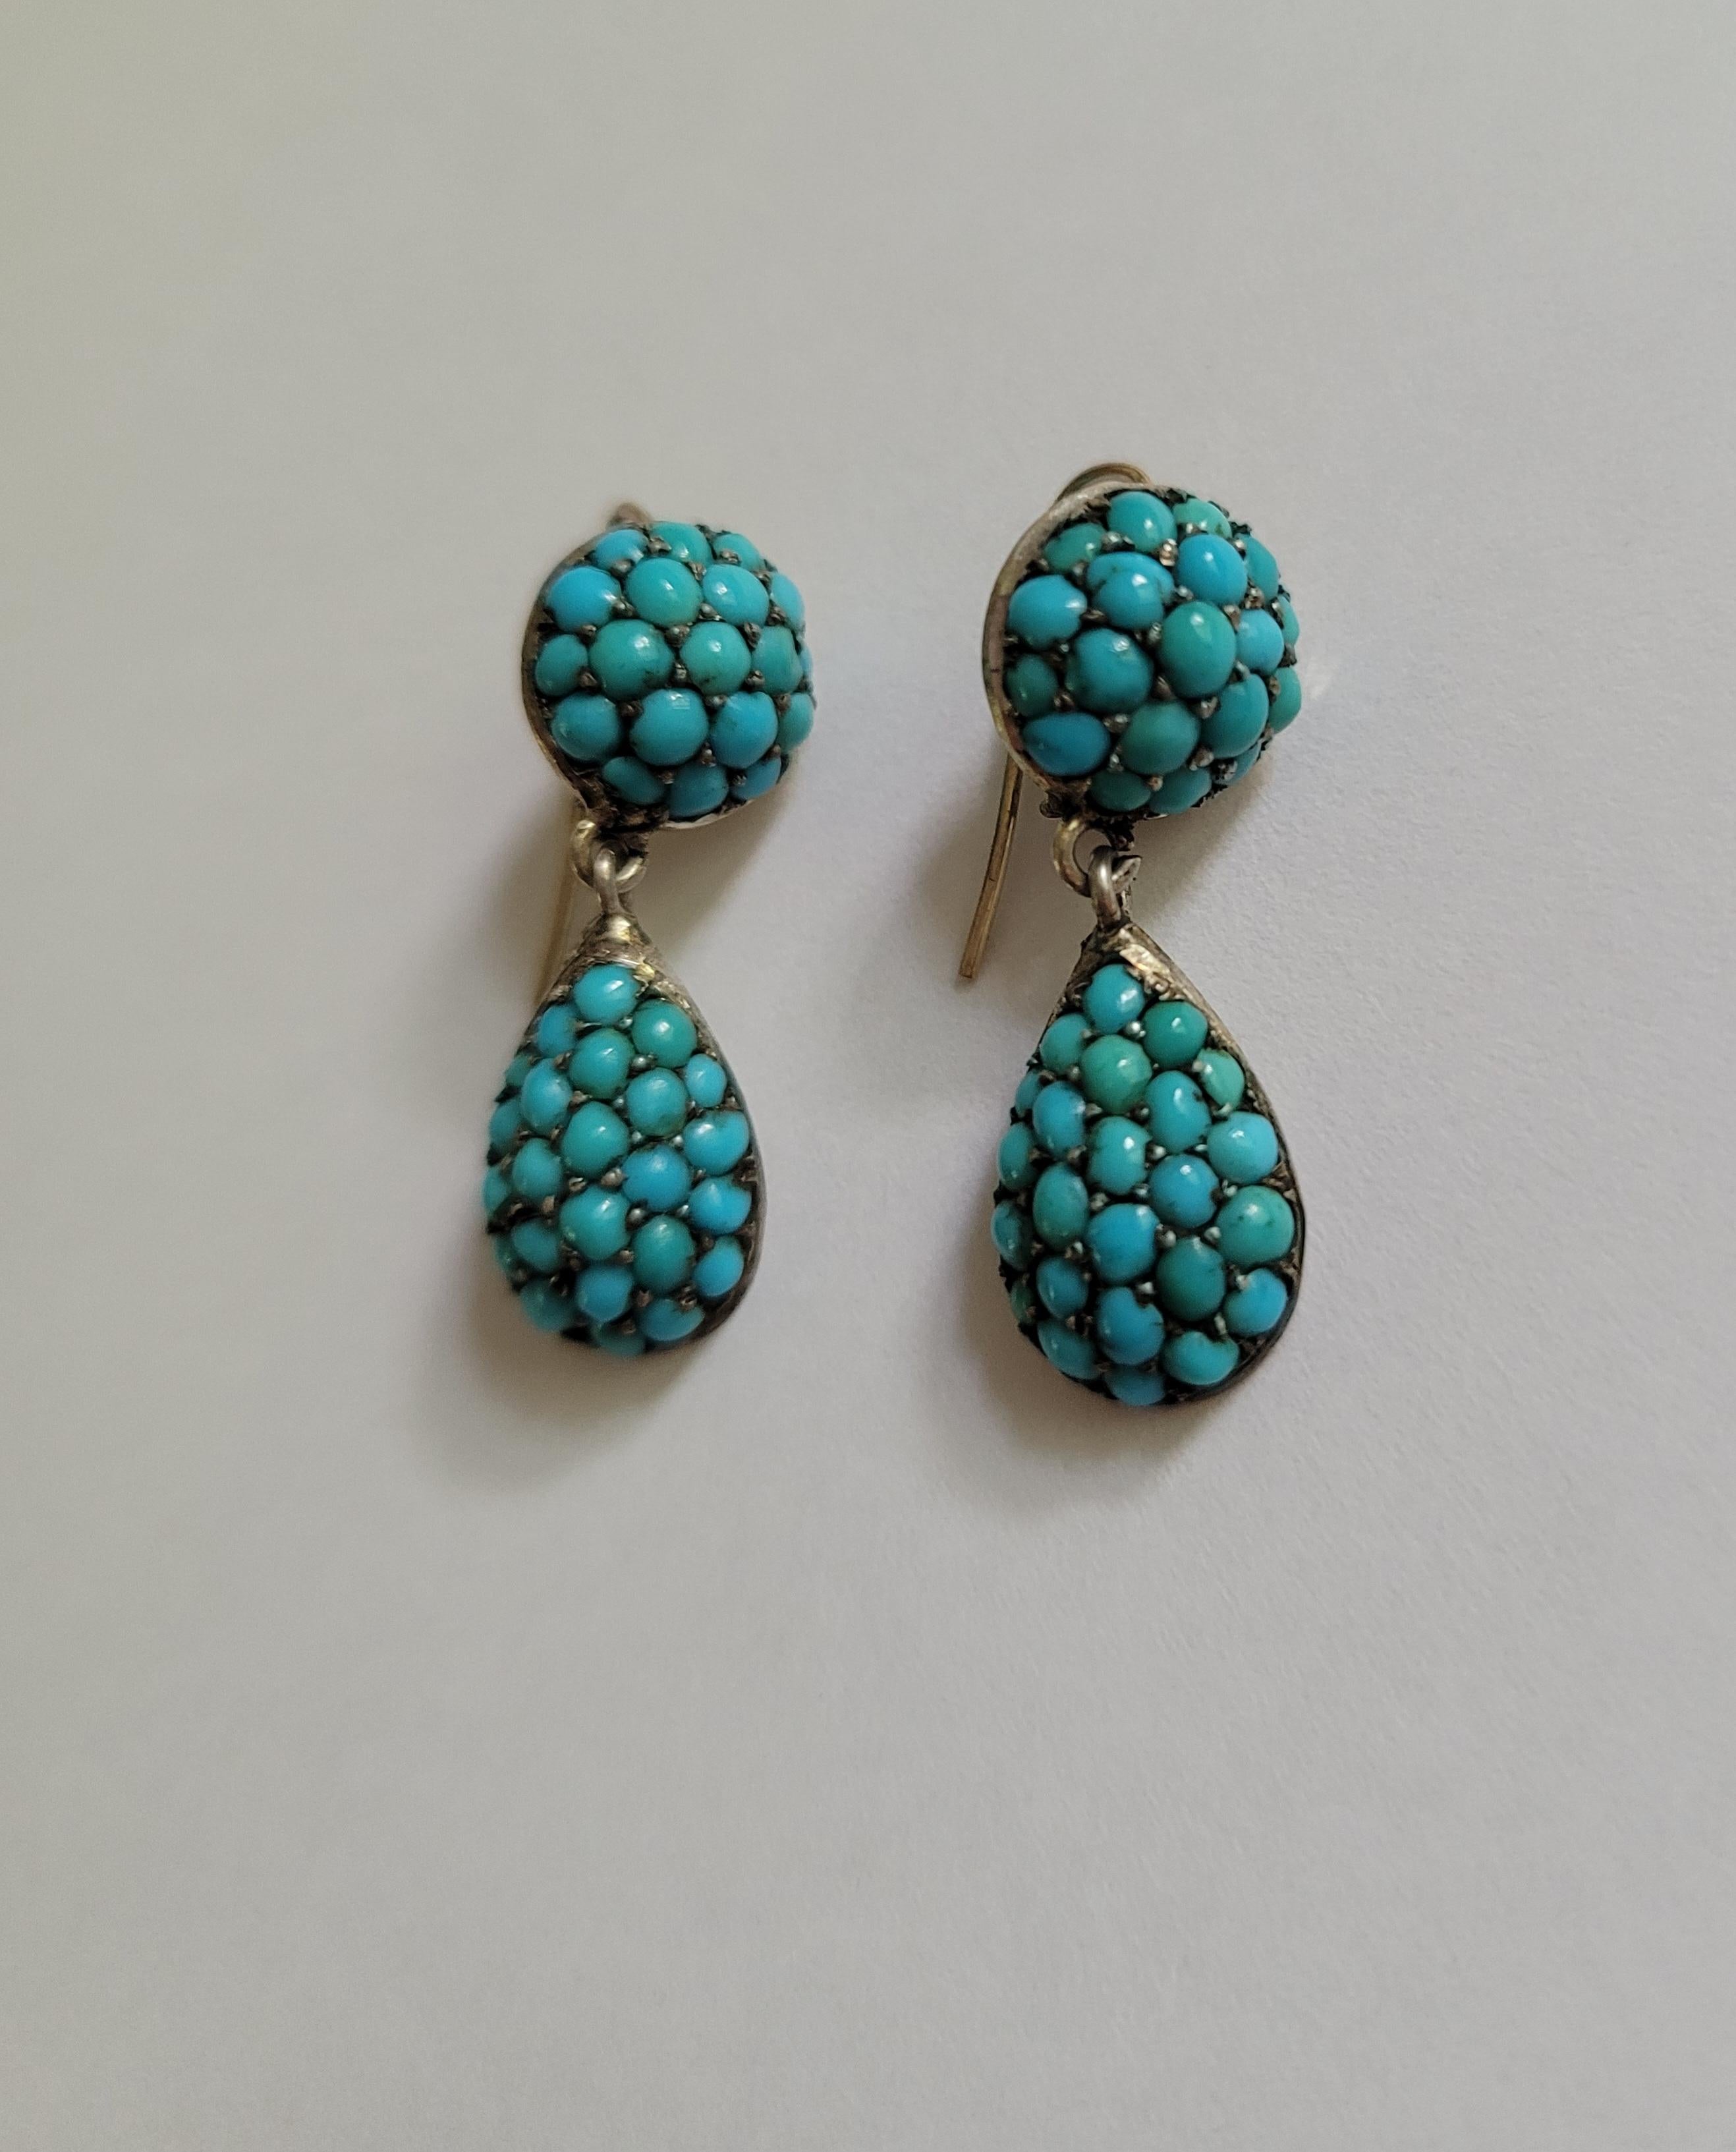 A Gorgeous Victorian Silver and Turquoise teardrop earrings. The stones in traditional Pave settings. The earrings are not heavy and perfect for everyday wear. English origin.

Total drop including hooks 27mm, 
drop without hooks 25mm,
width of the